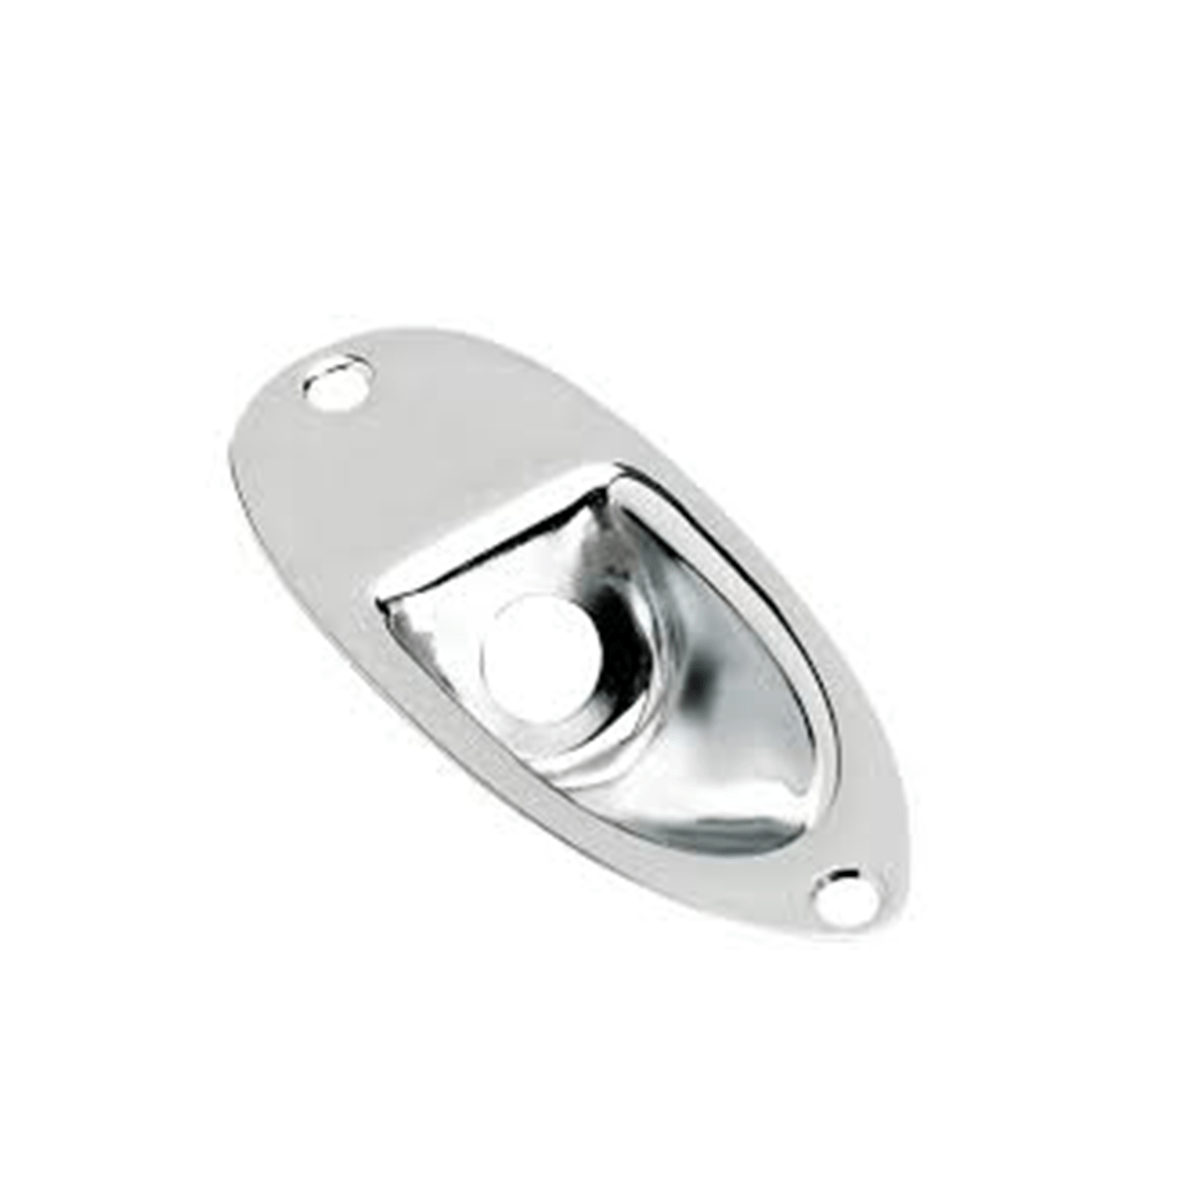 DR PARTS Home Page Recessed Oval Jack Plate Chrome 81 X 32.5MM - Byron Music